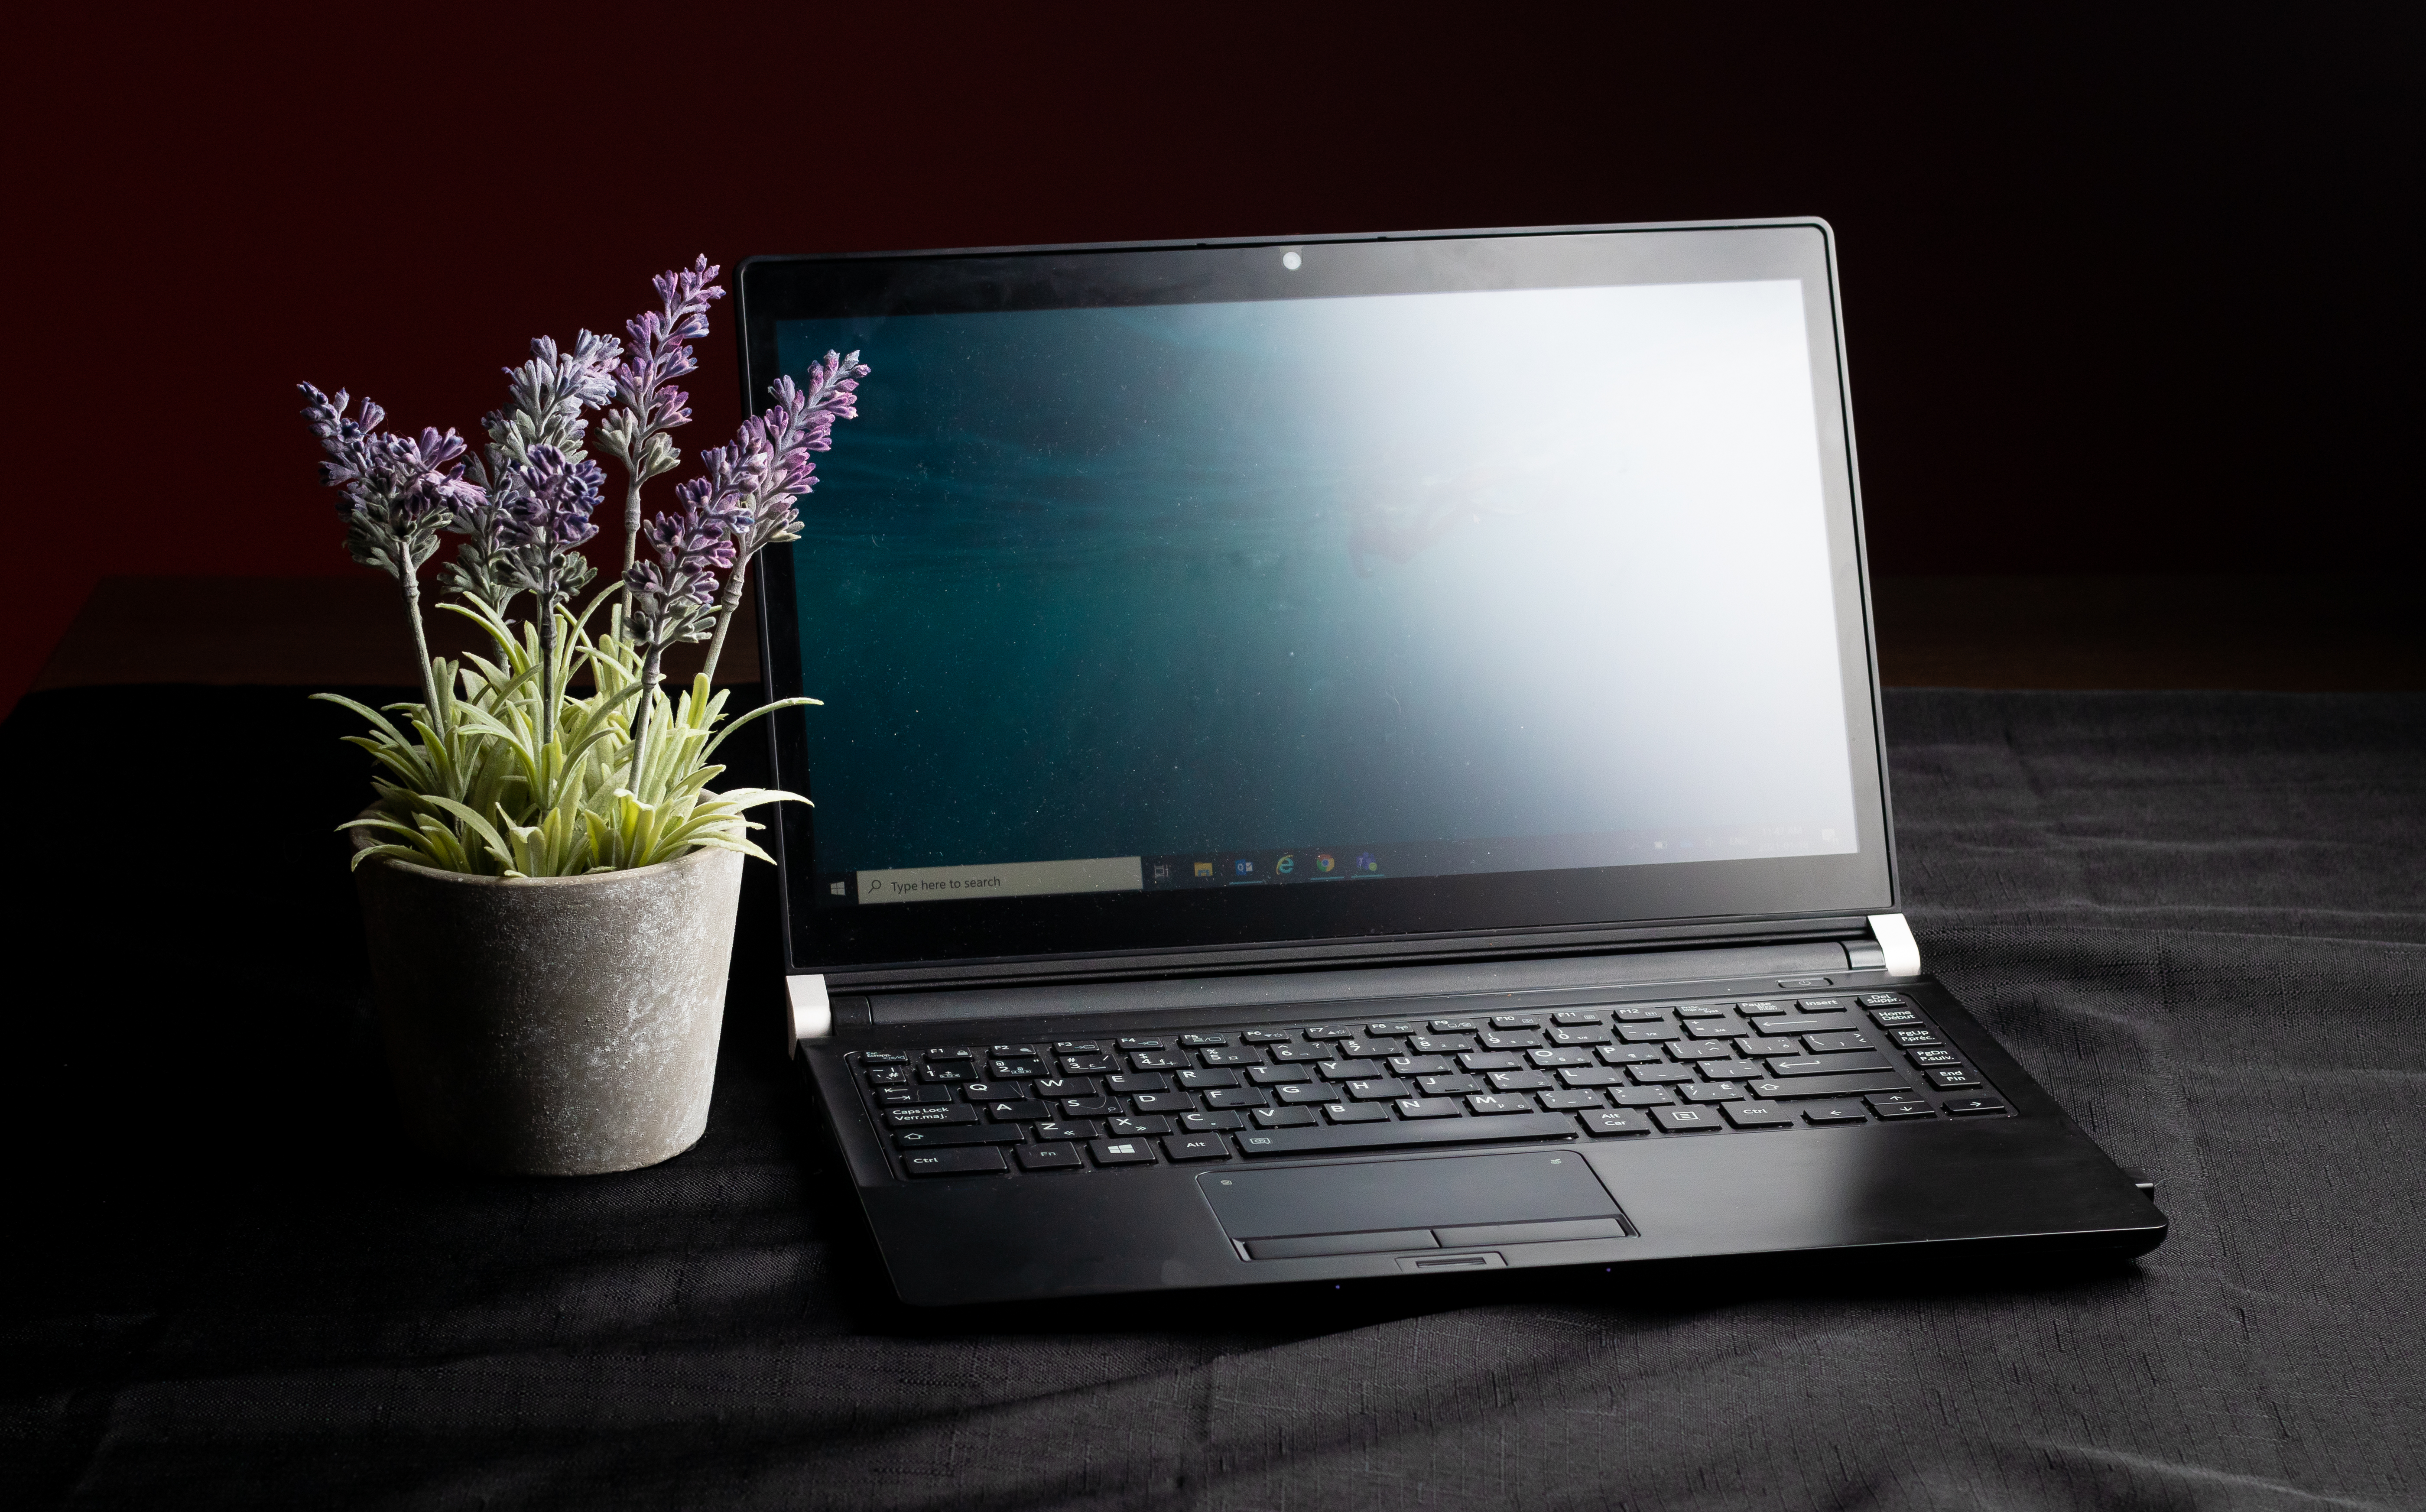 Laptop and a lavender plant on a dark background.